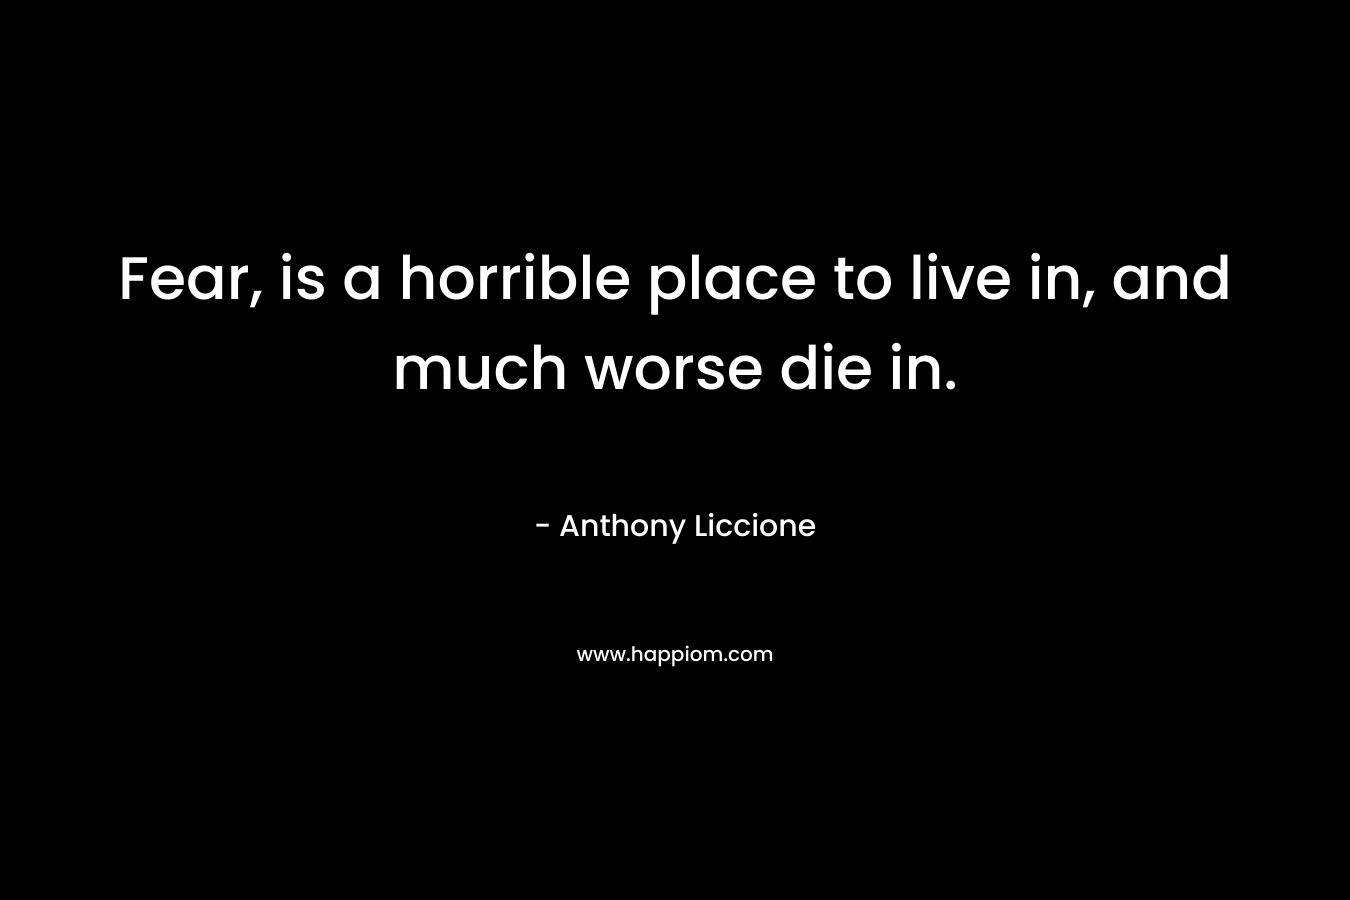 Fear, is a horrible place to live in, and much worse die in. – Anthony Liccione